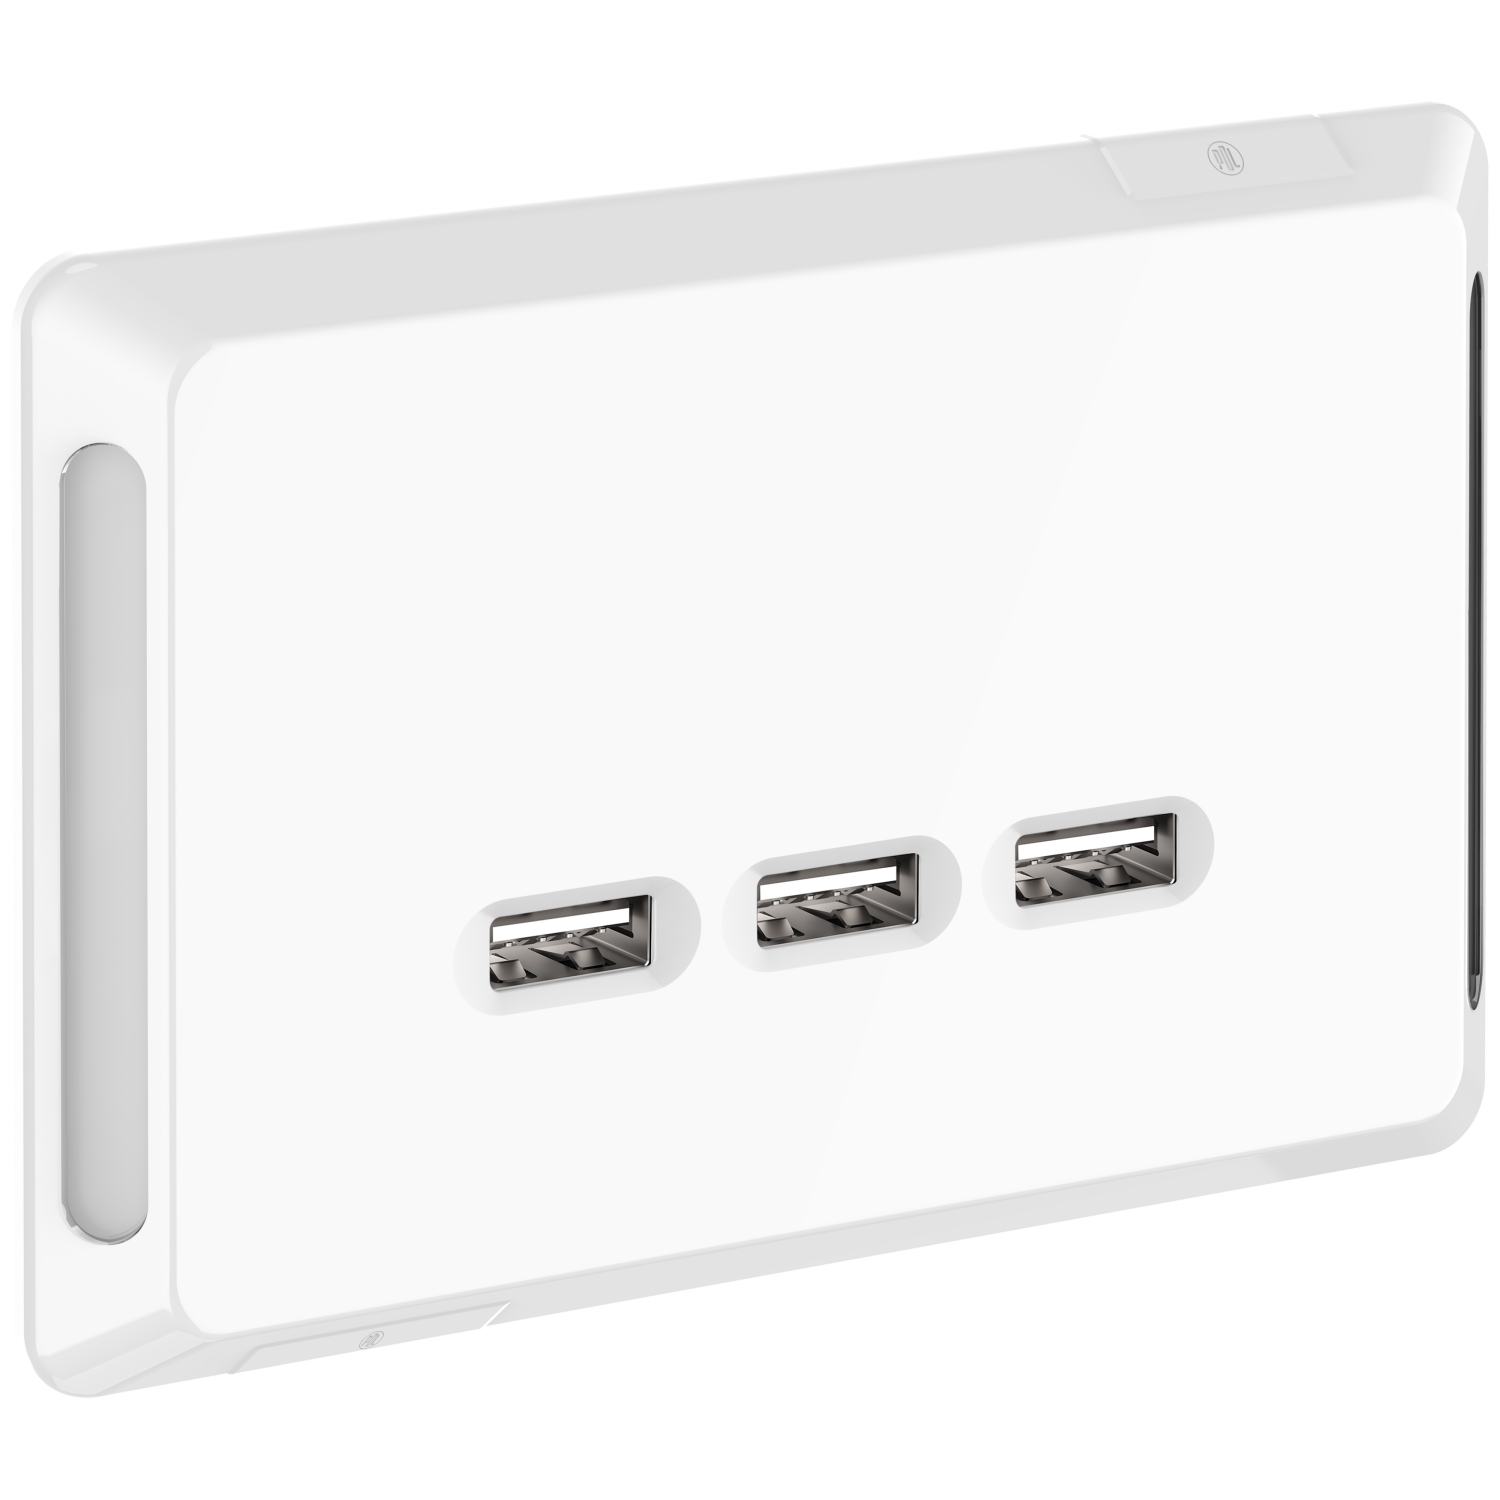 PDL Pro Series - Cover Plate USB Charger Type A 2.1A 3-Gang - White